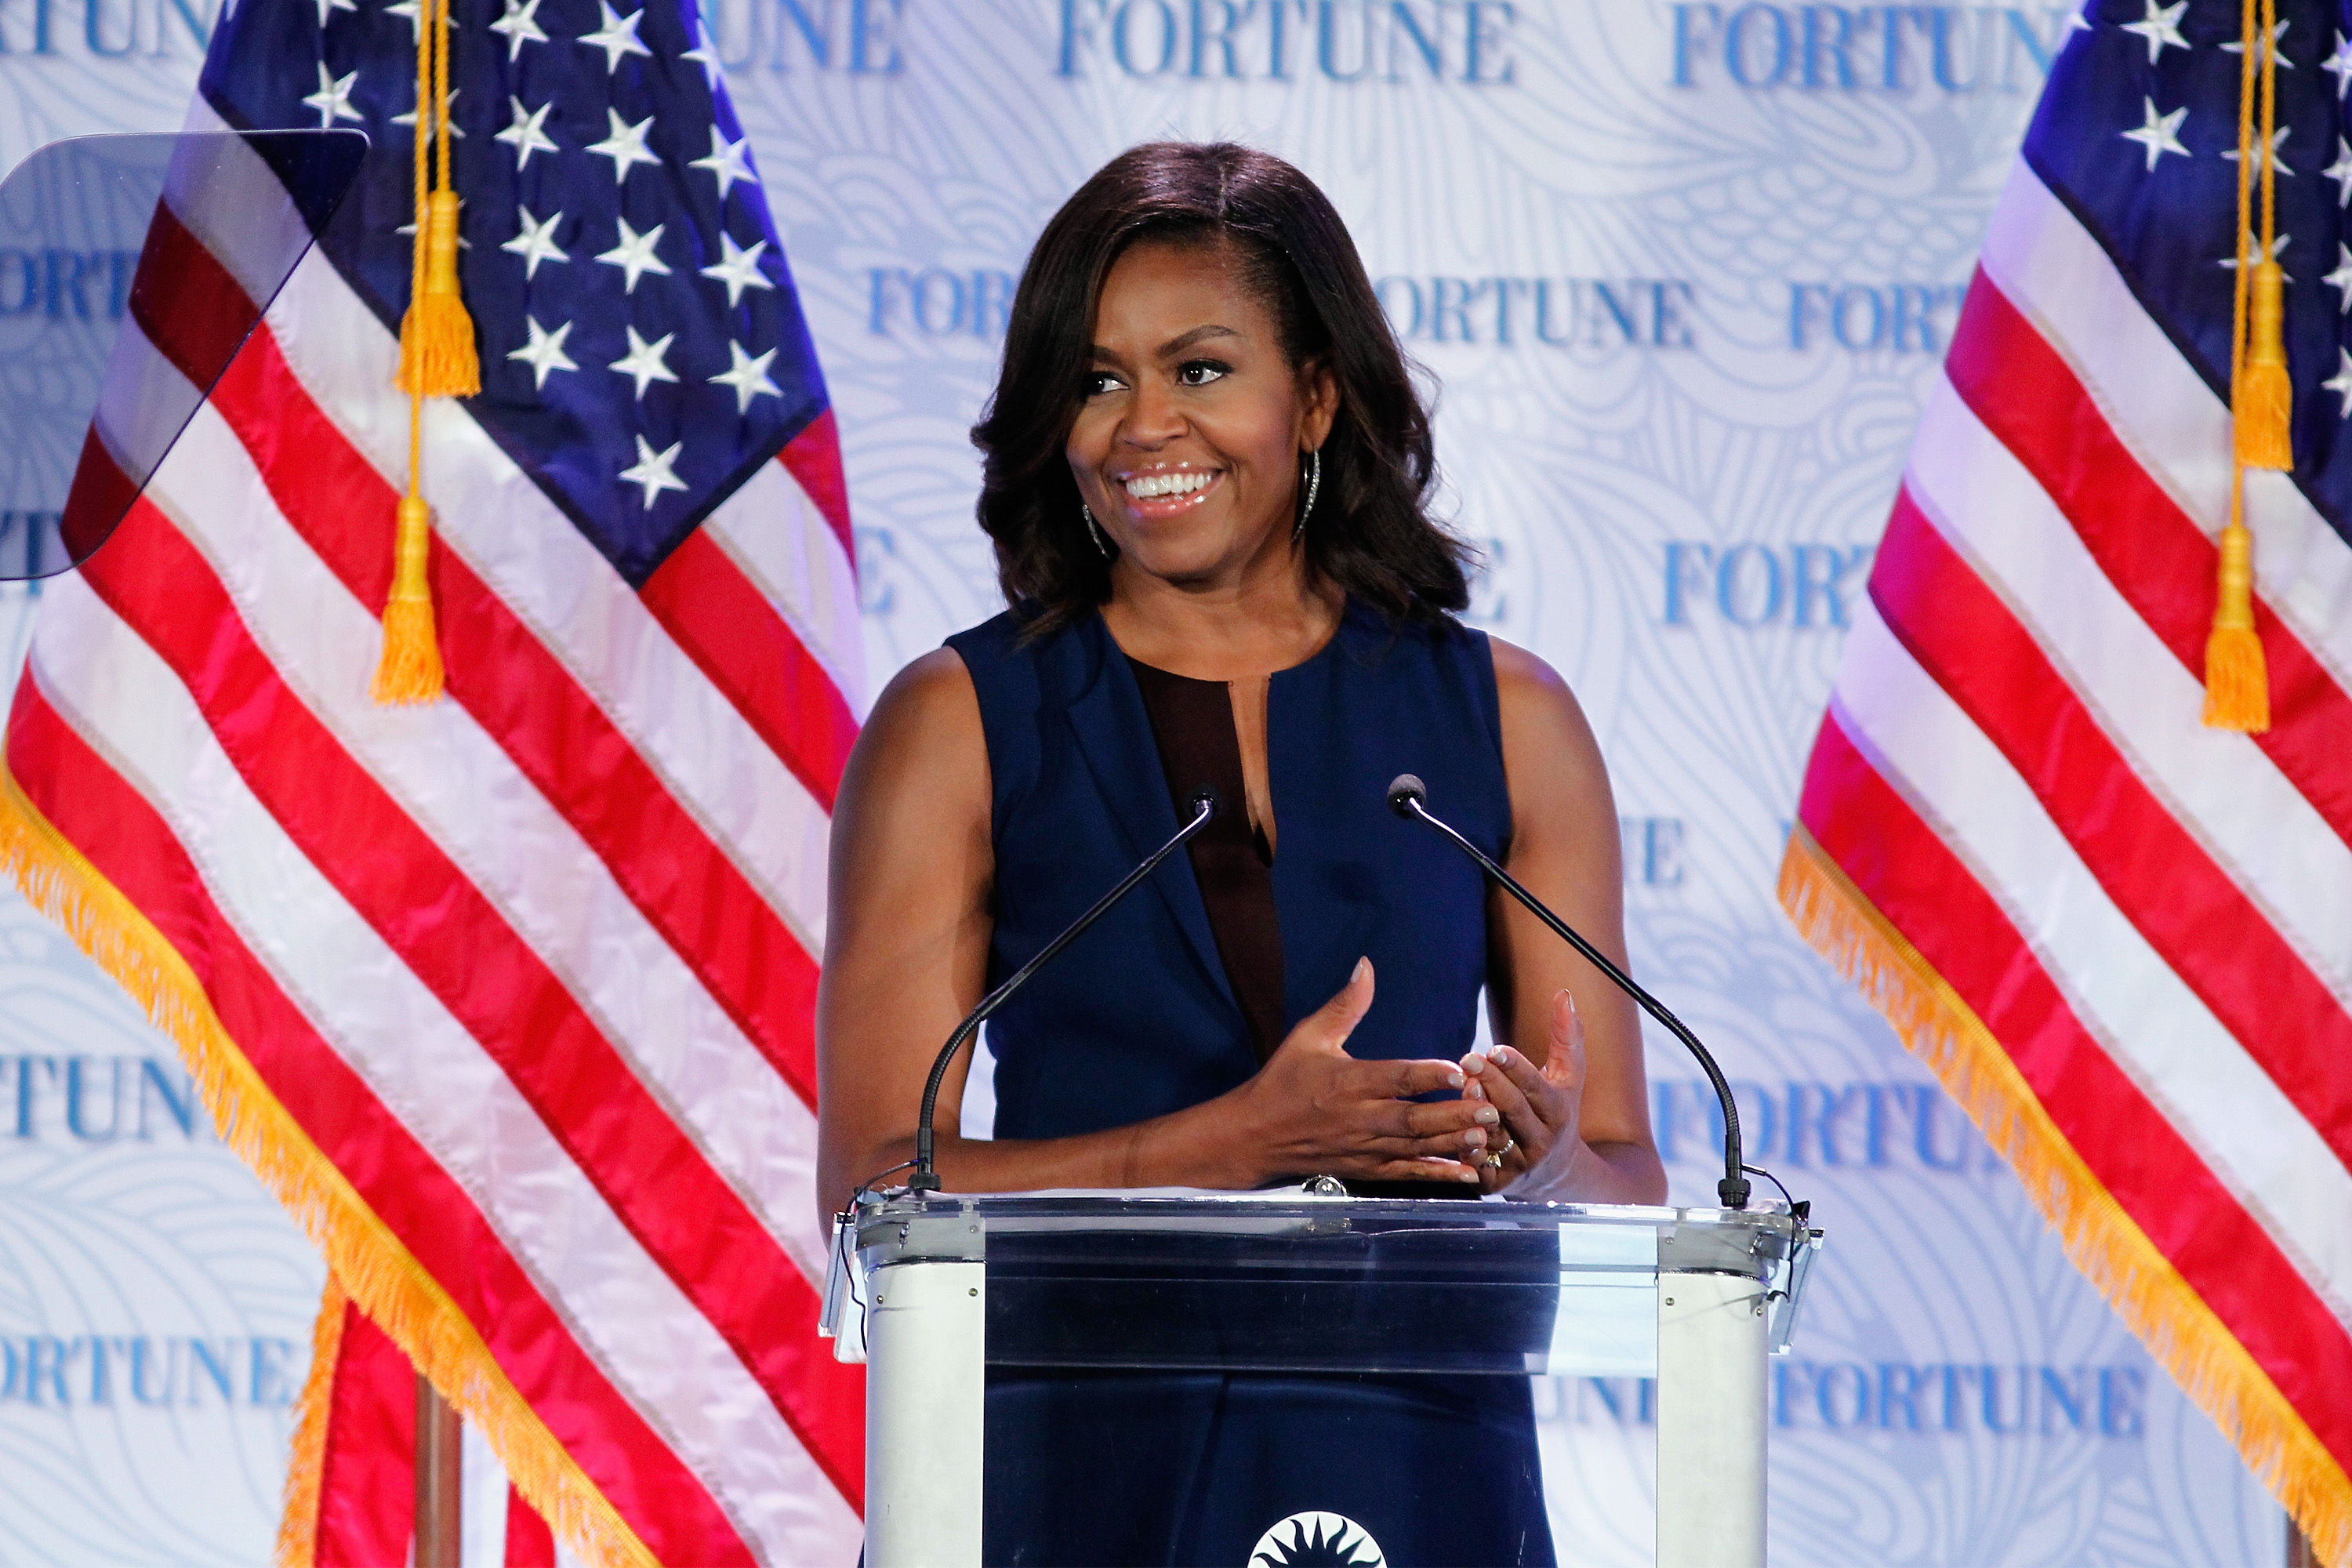 Fortune's Most Powerful Women Summit - Day 2